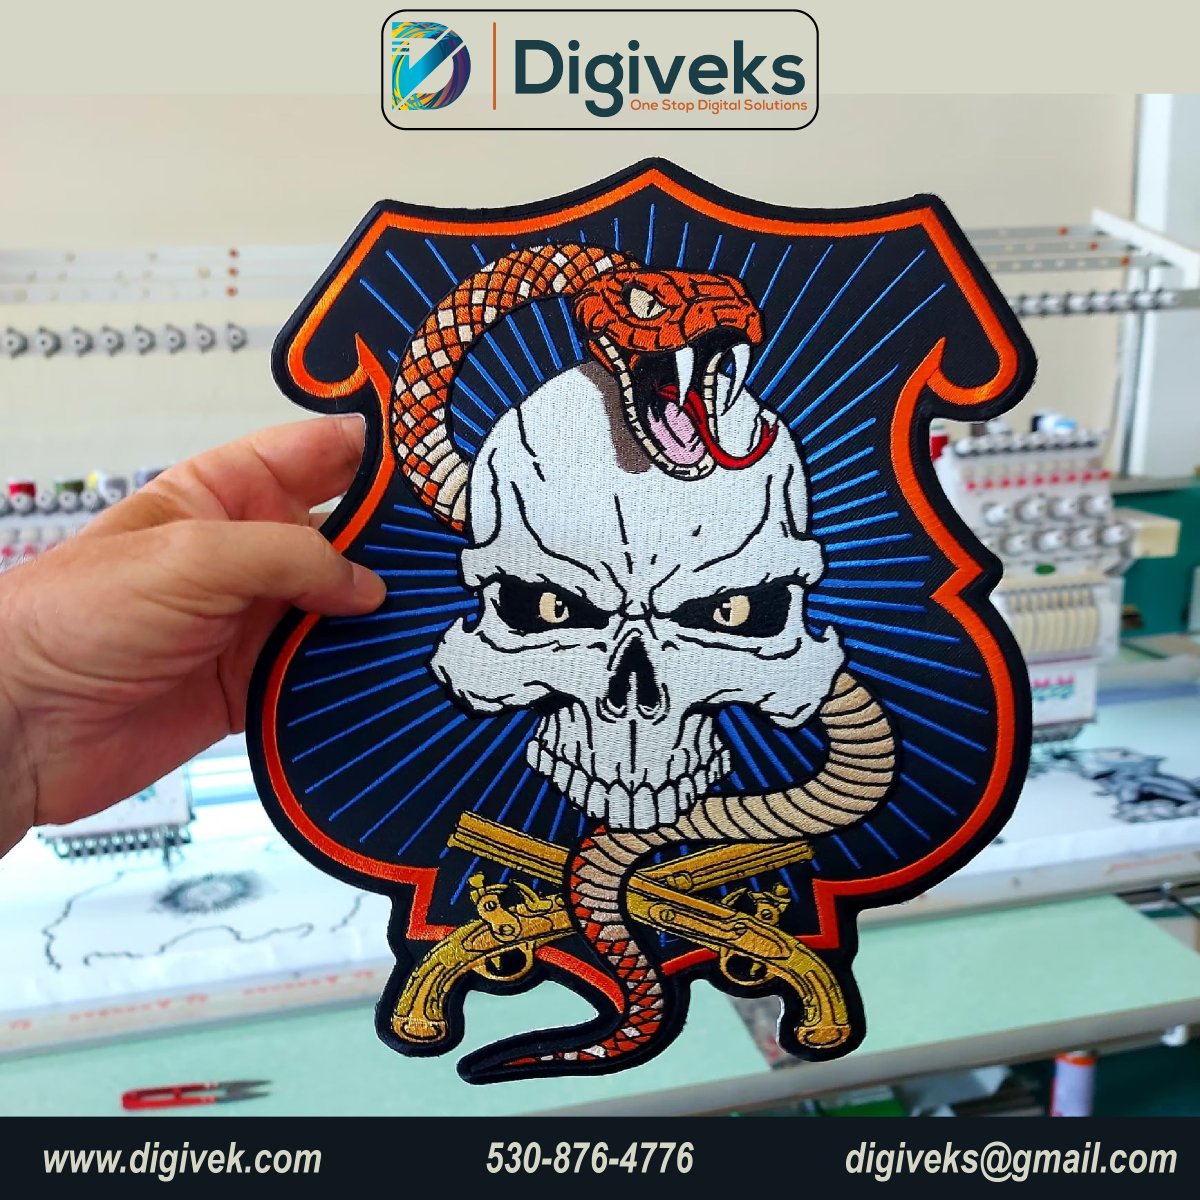 Are you Looking for #custompatches Within Competitive Price, We can make it possible for You. 
#patch #patches #emblem #patchmurah #patchwork #jualpatch #patchcollector #embroidery #custompatch #patchgame #bordir #ironpatch #patchbordir #jualemblem #patchcollection #bordirkompute